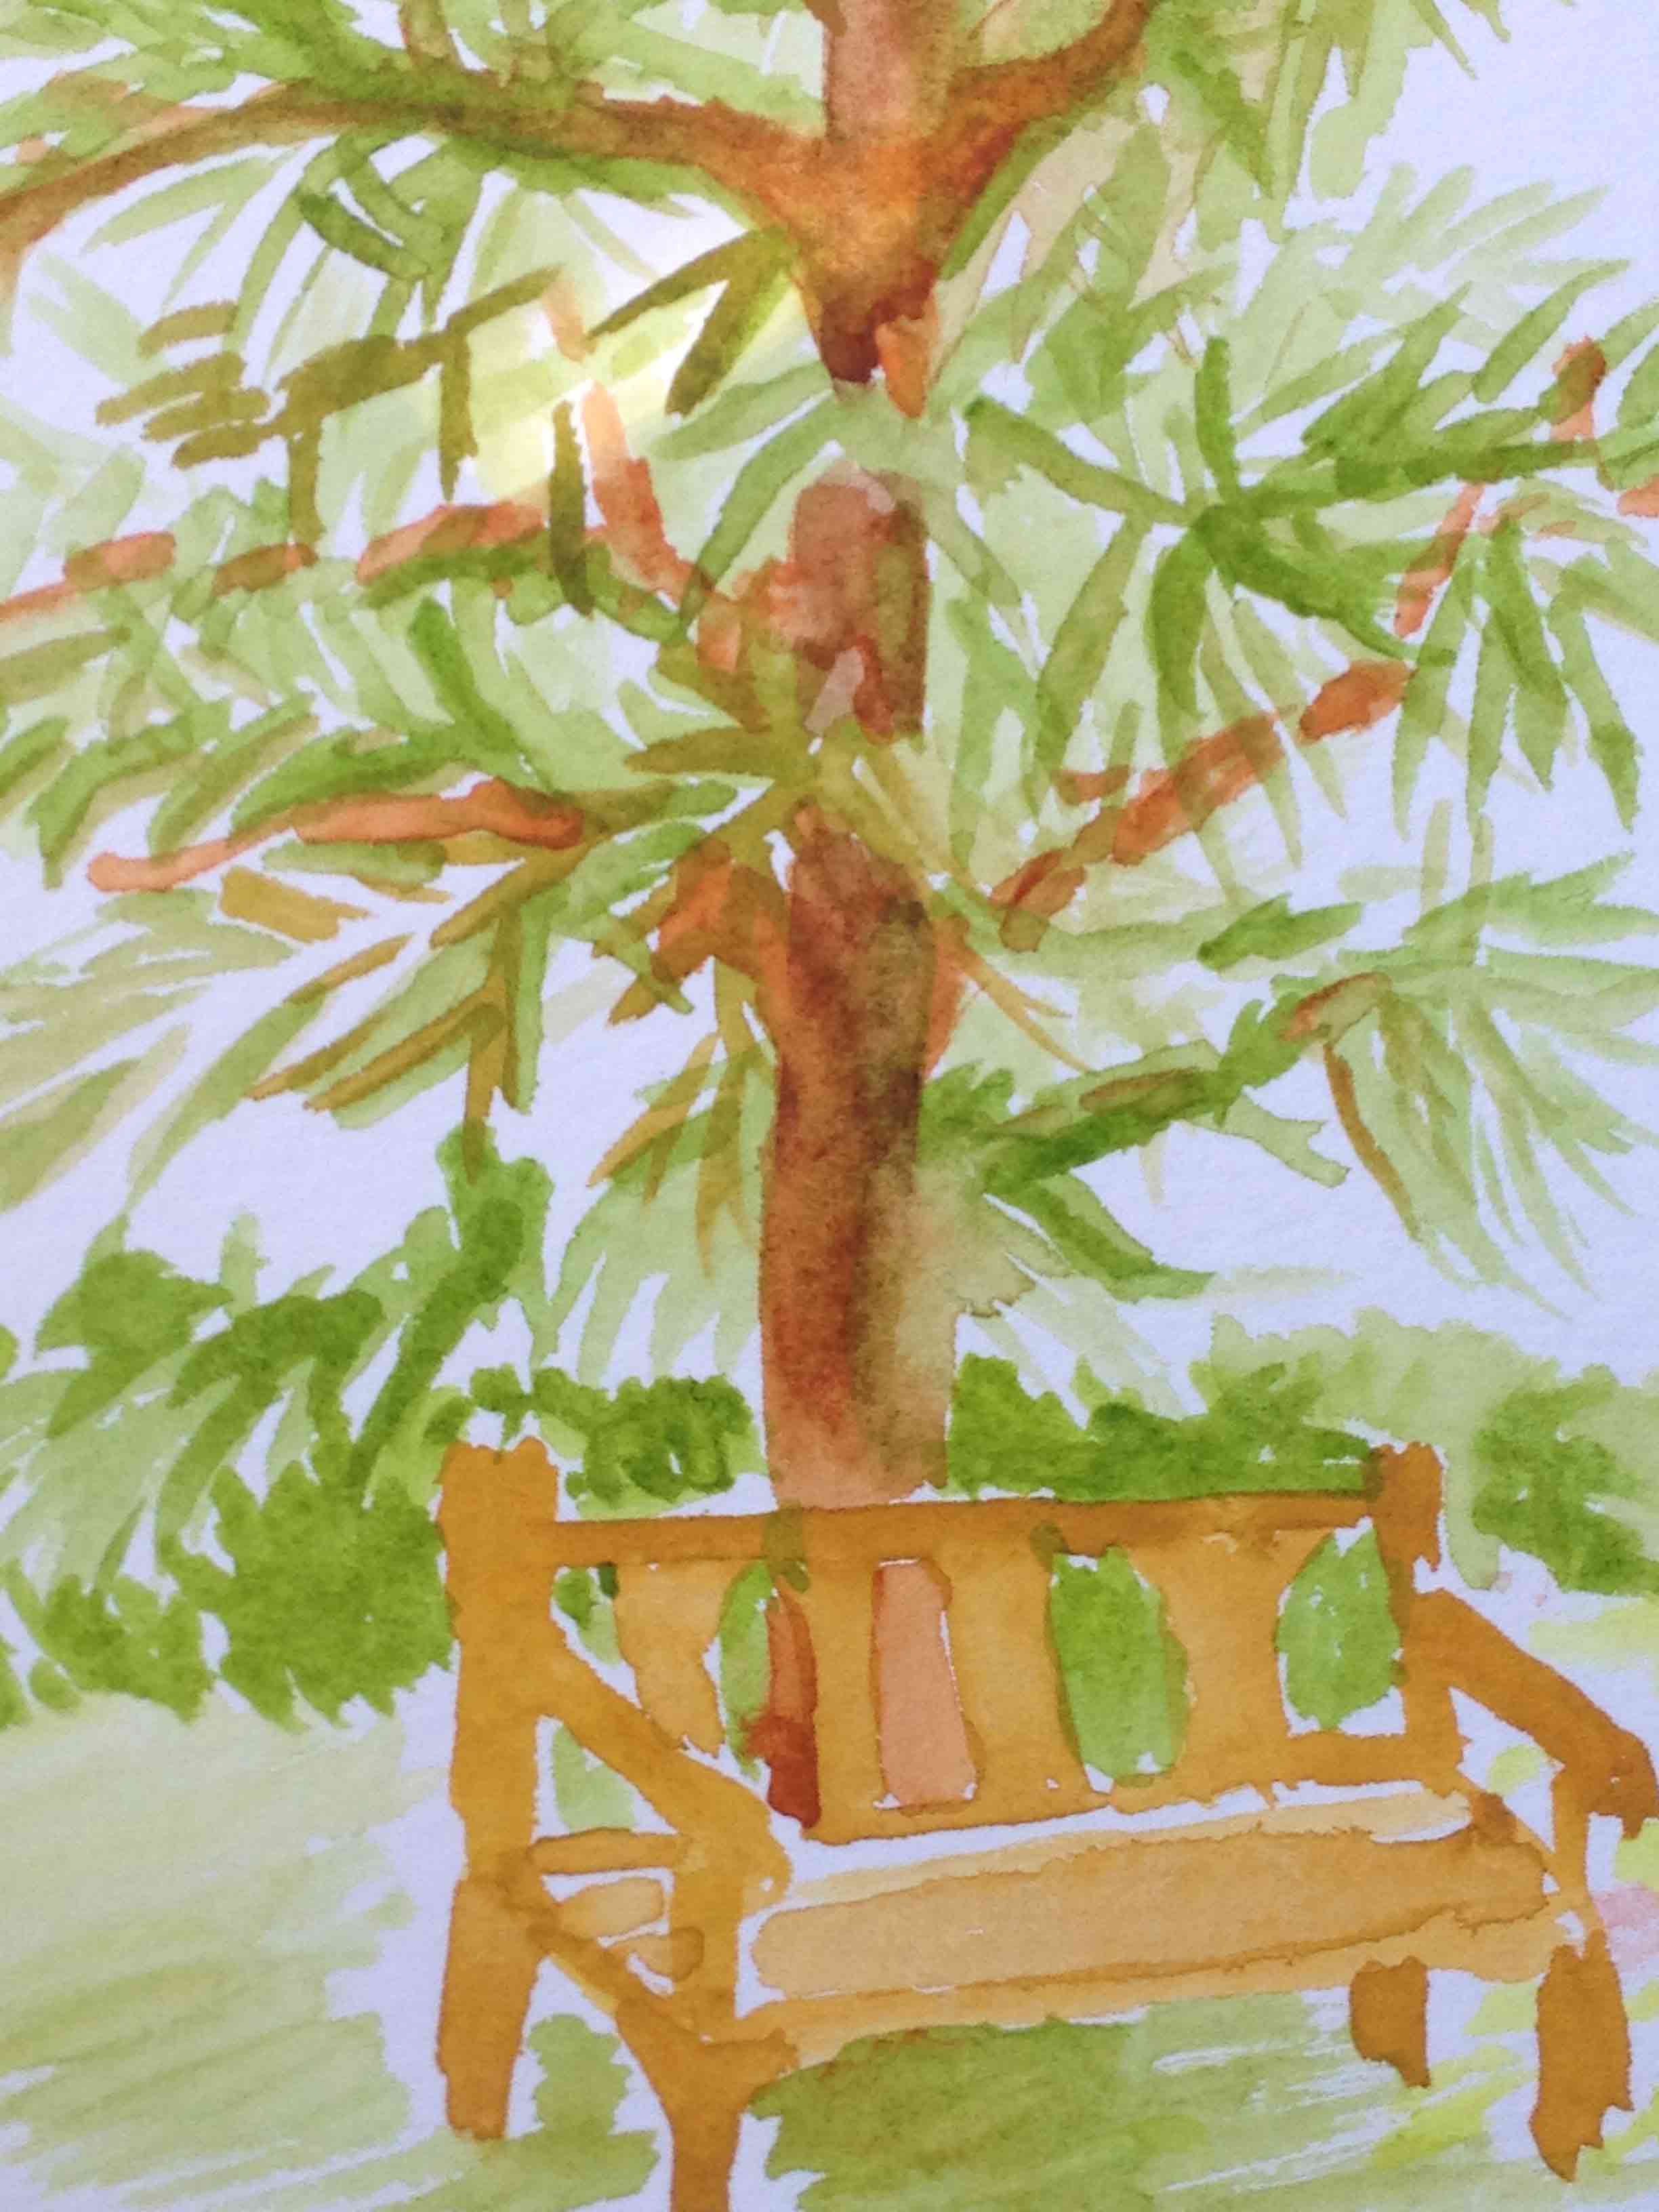 watercolor painting of a monkey puzzle tree